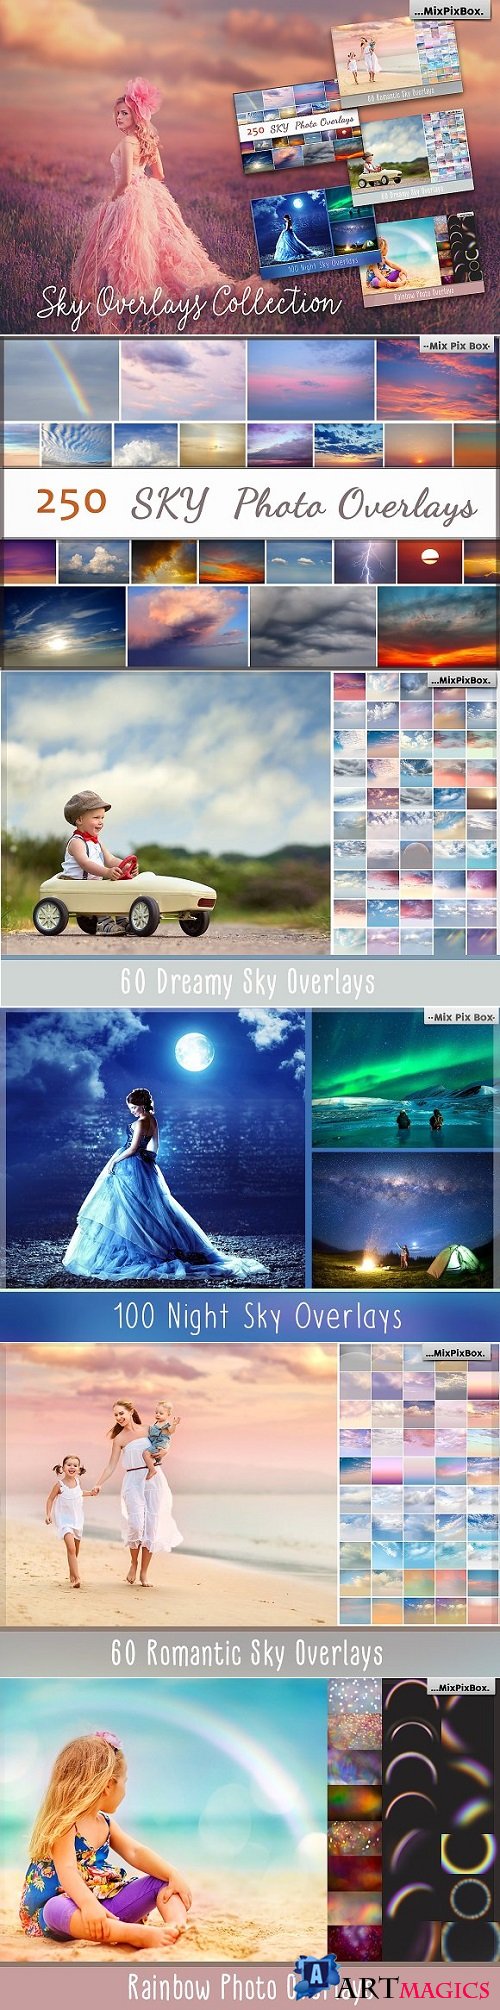 Sky Overlays Collection - 1776584